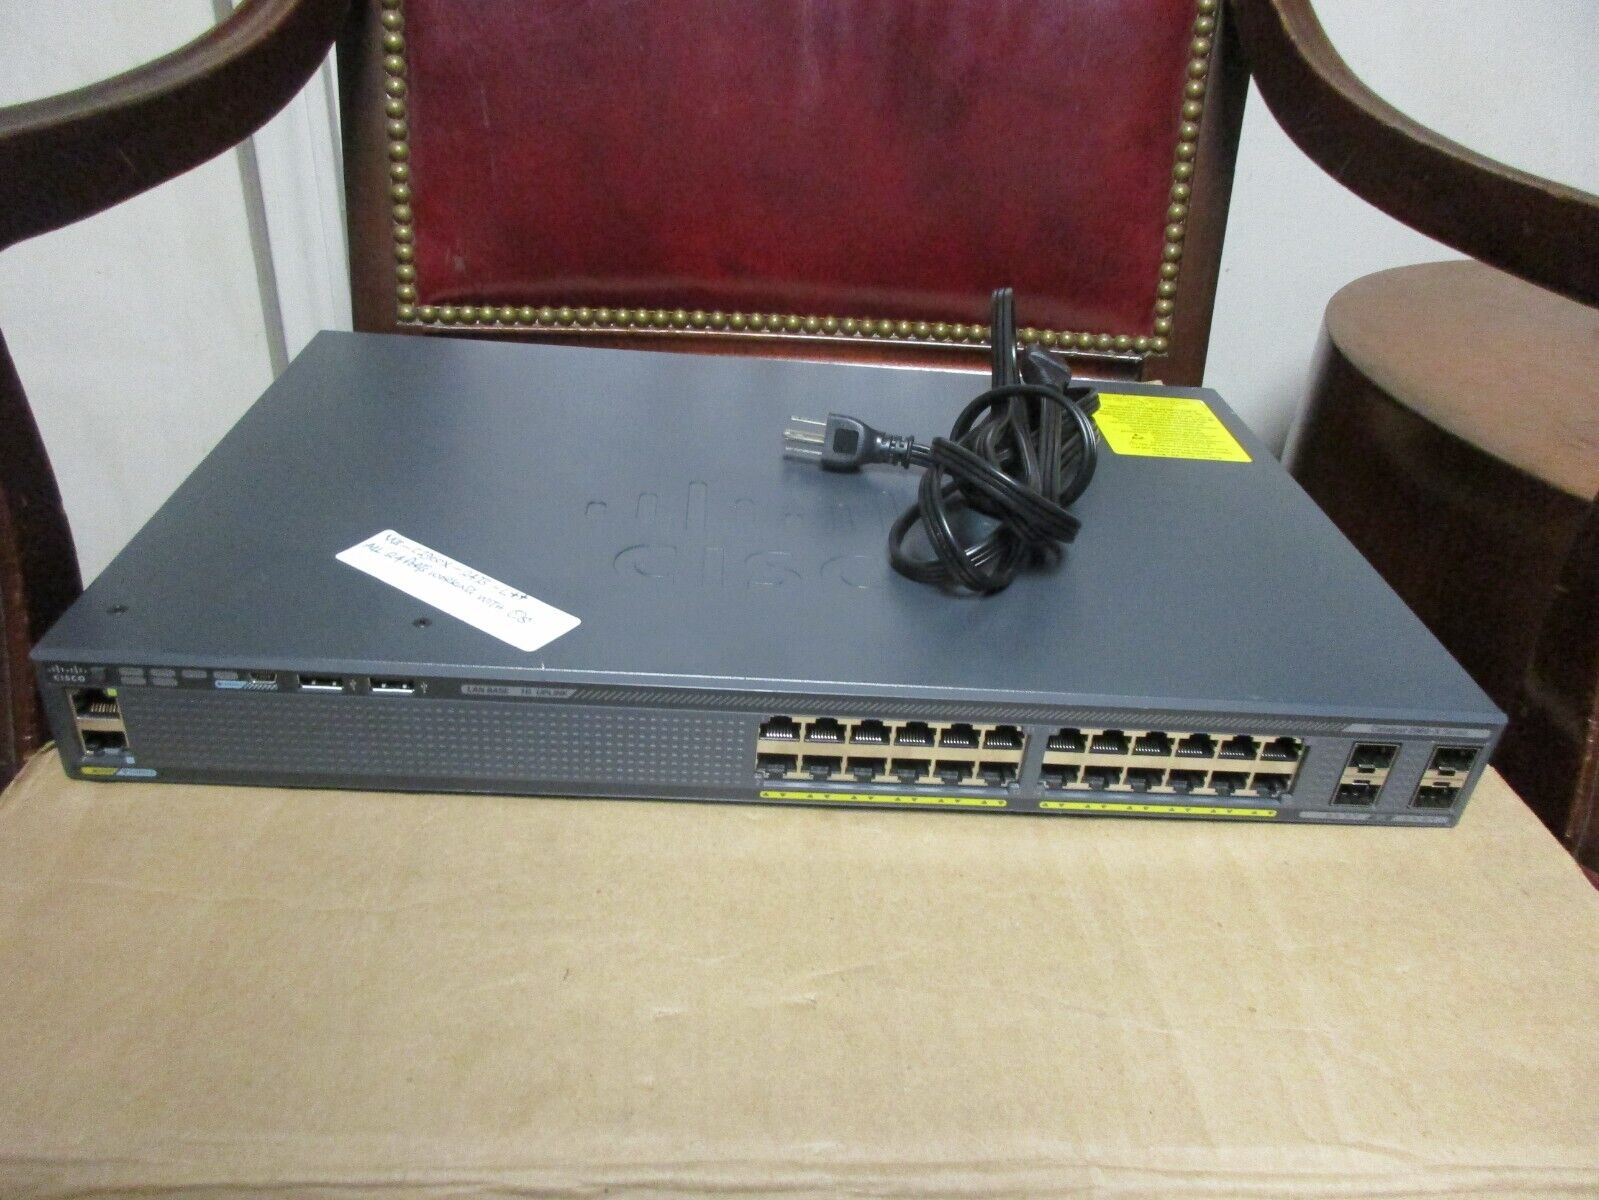 Cisco Catalyst 2960-X Series WS-C2960X-24TS-L ++ V02 Switch with Cable